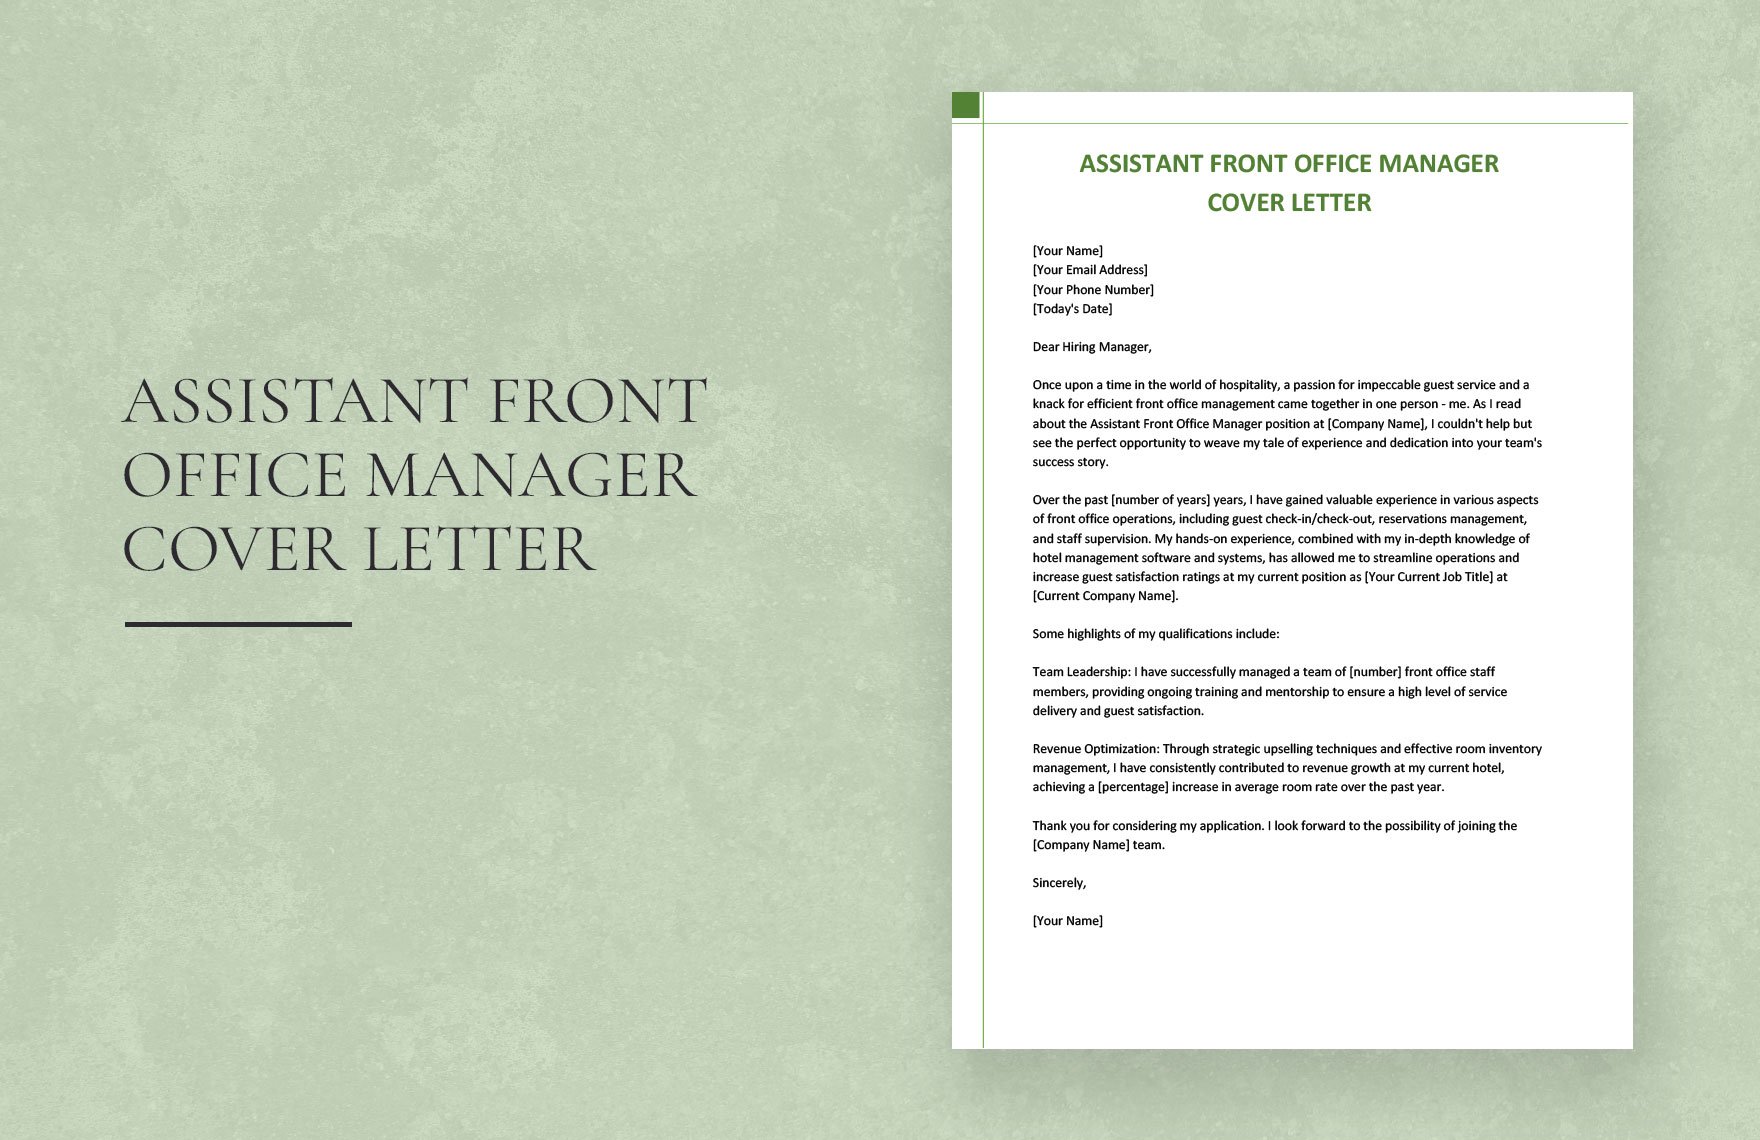 Assistant Front Office Manager Cover Letter